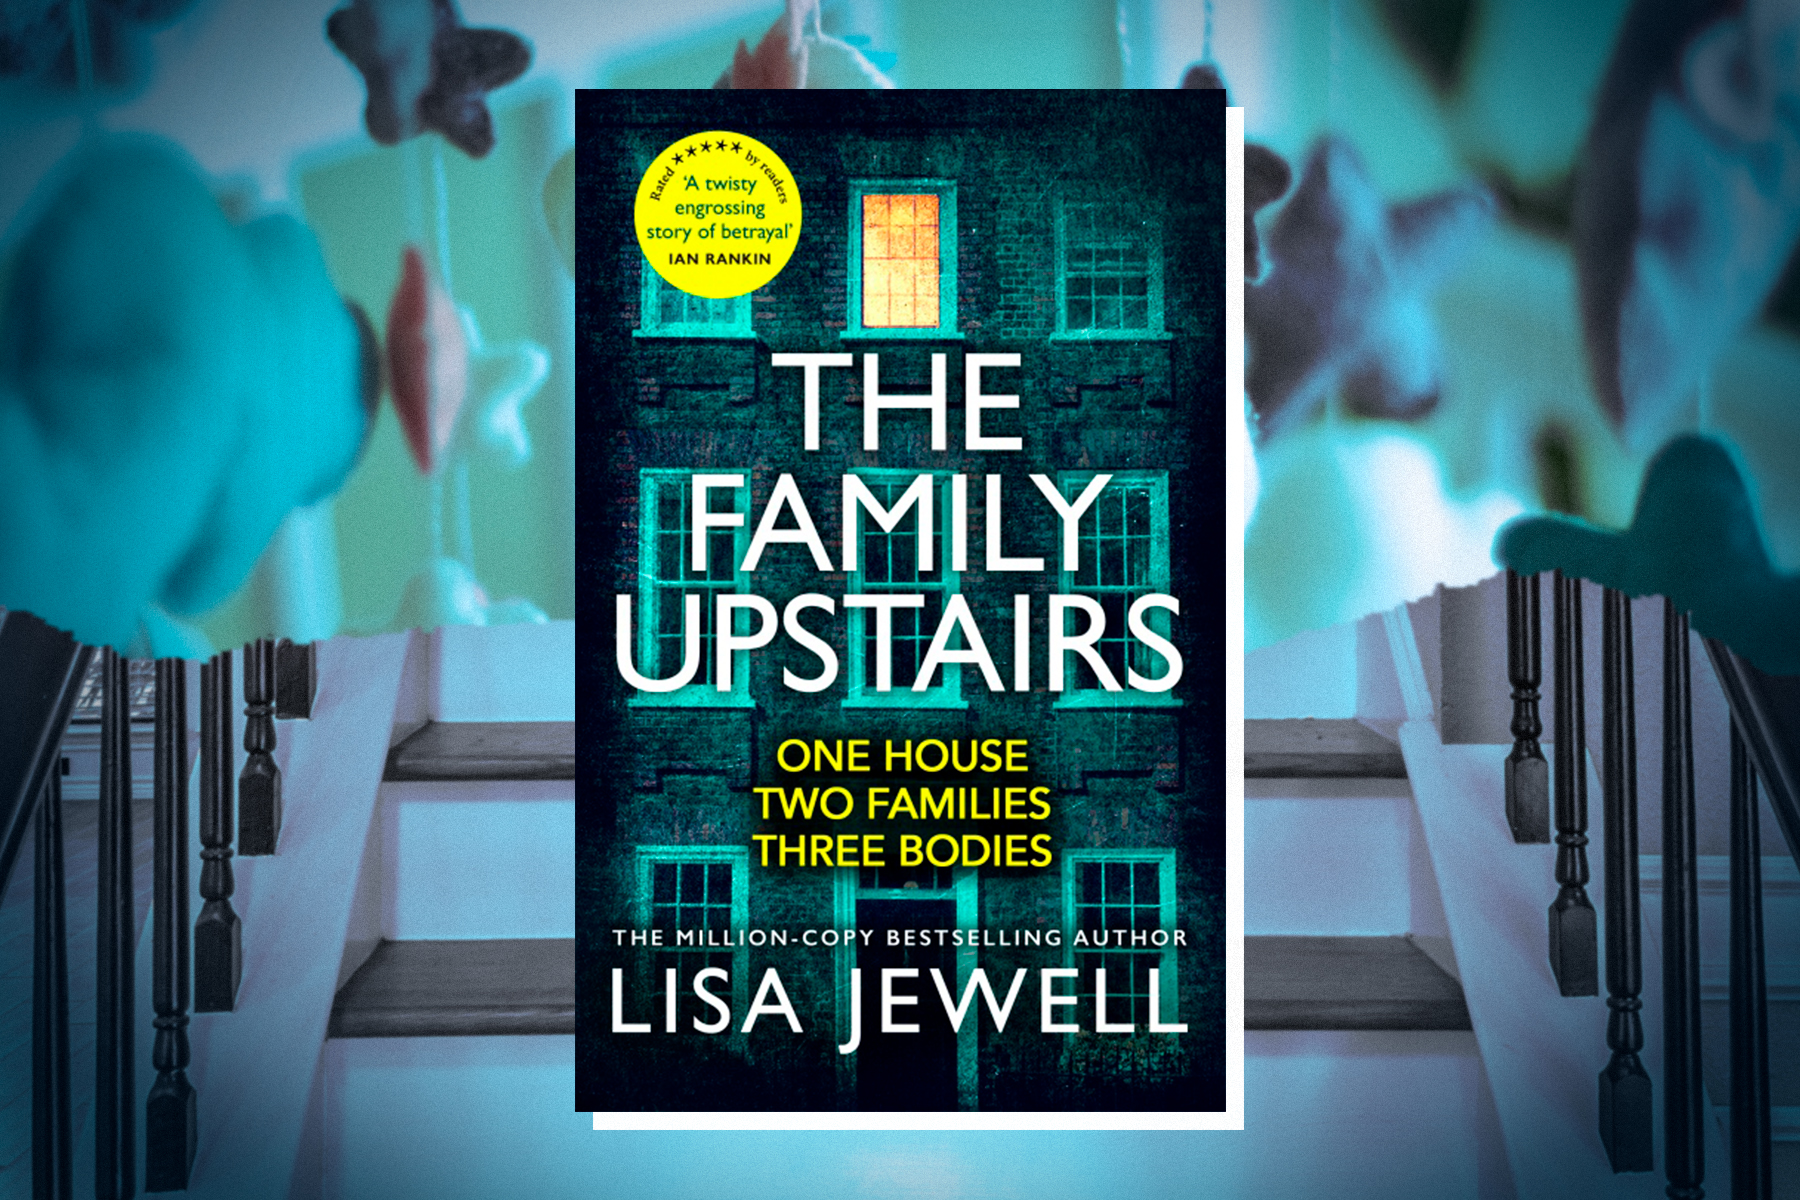 An image of Lisa Jewell's novel The Family Upstairs against a colourful but subdued backdrop.